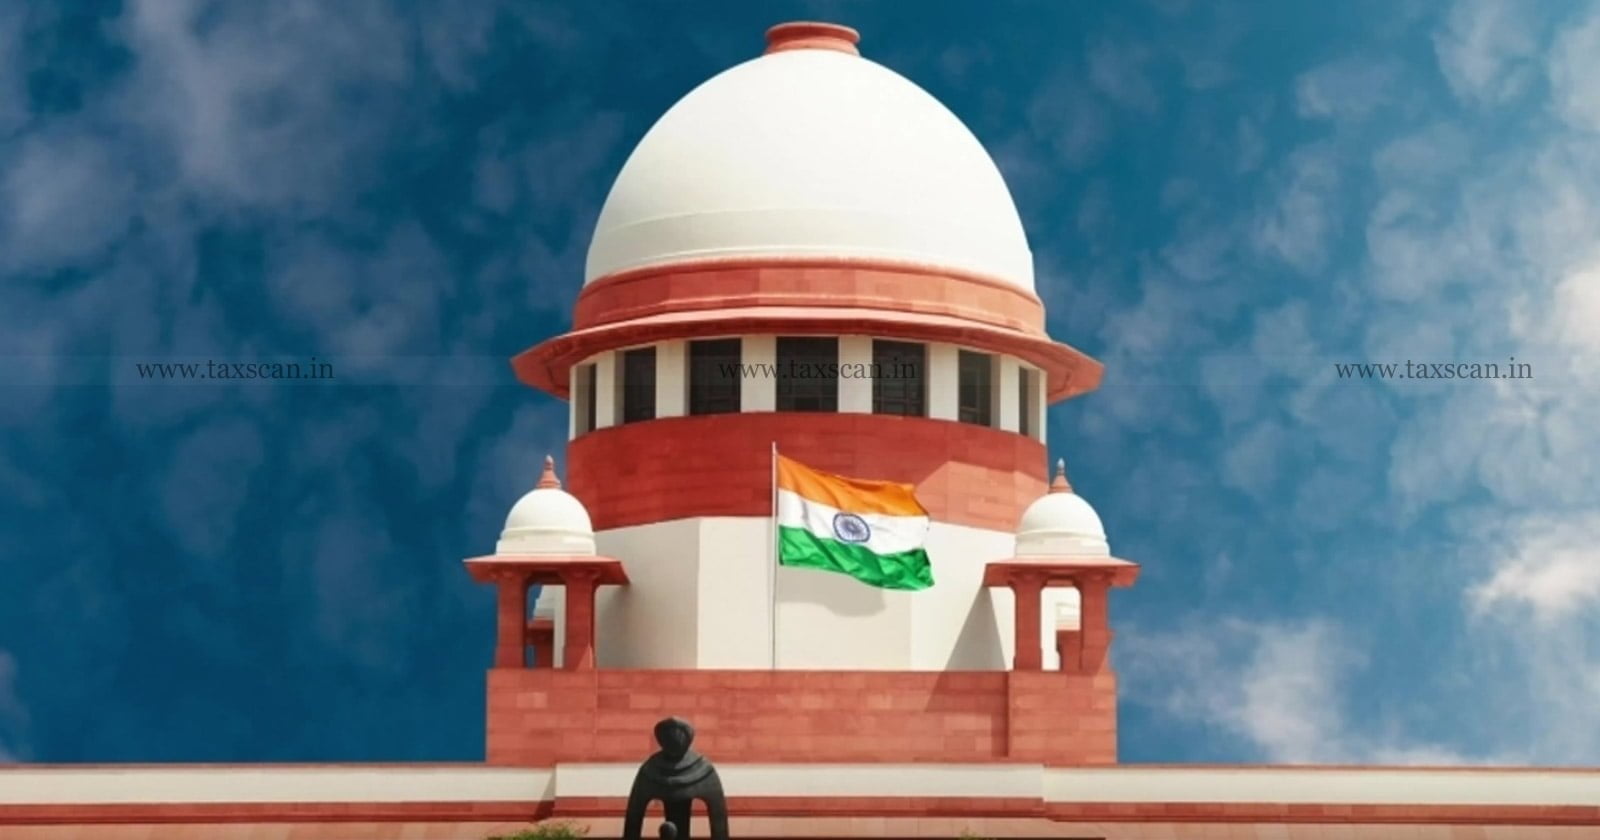 Services Rendered - Procurement of Goods for Exports - categorized intermediary services - Supreme Court Dismisses Appeal - TAXSCAN